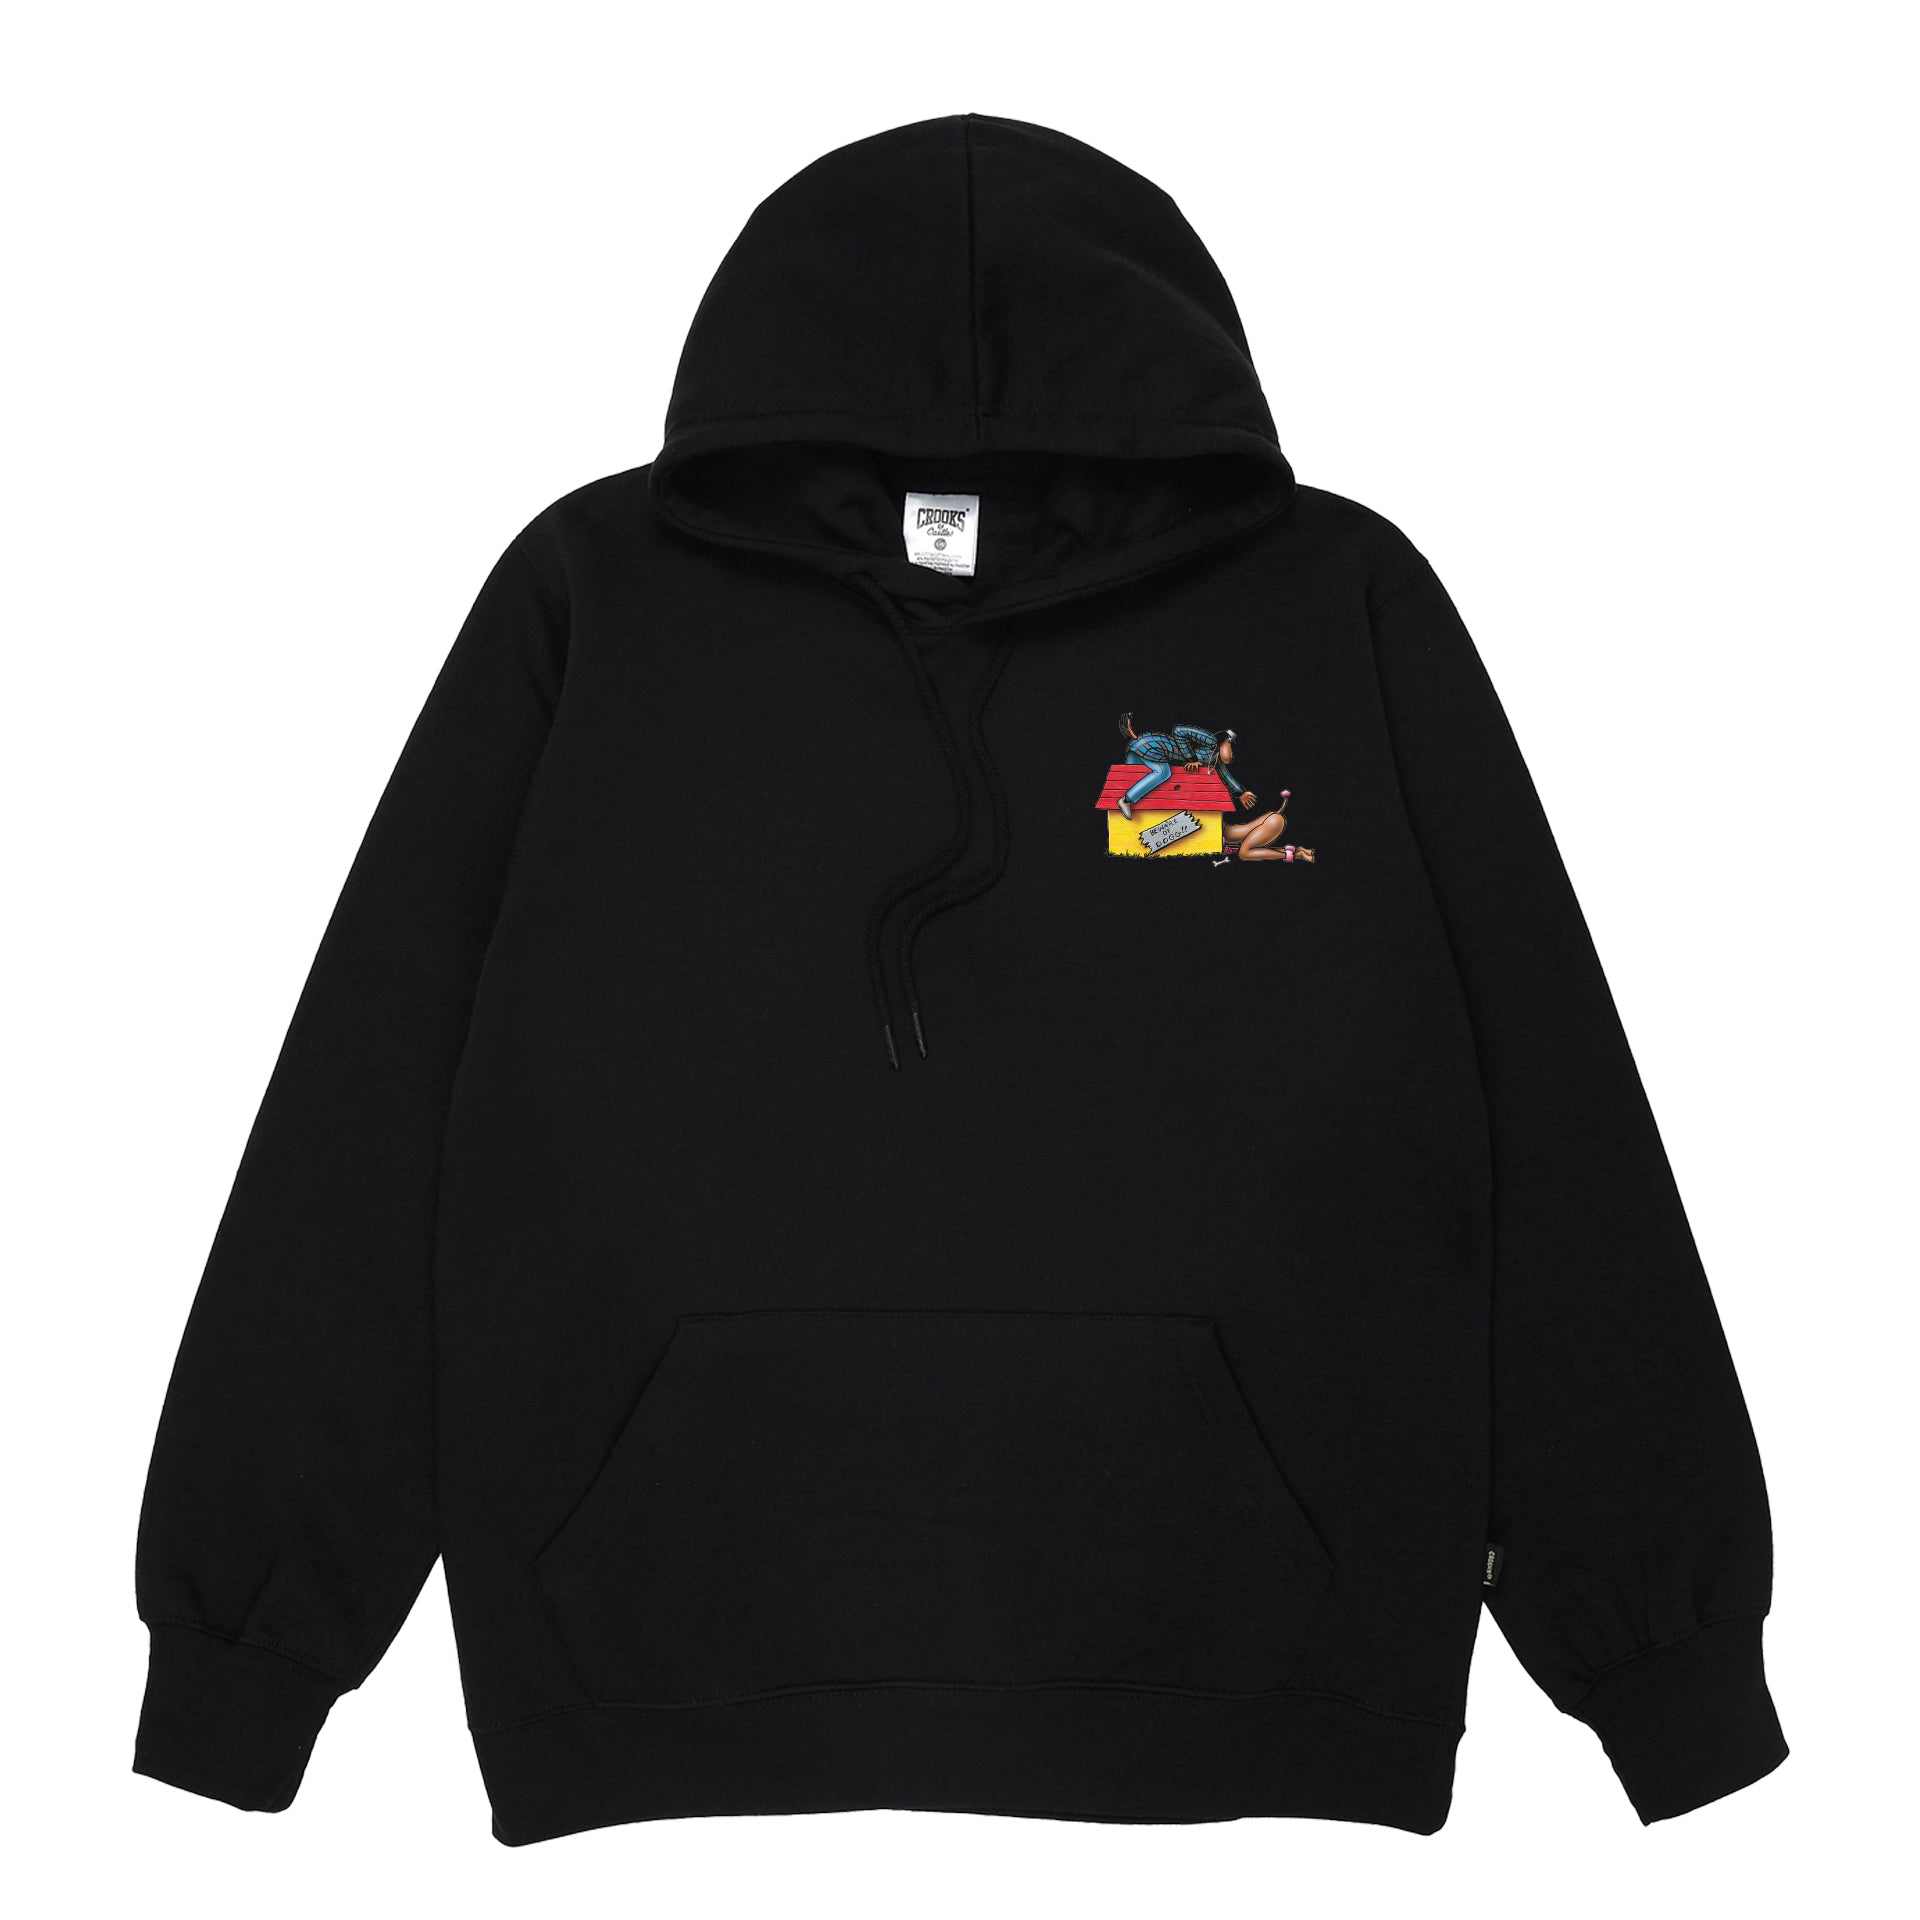 Doggystyle Back Album Cover Hoodie